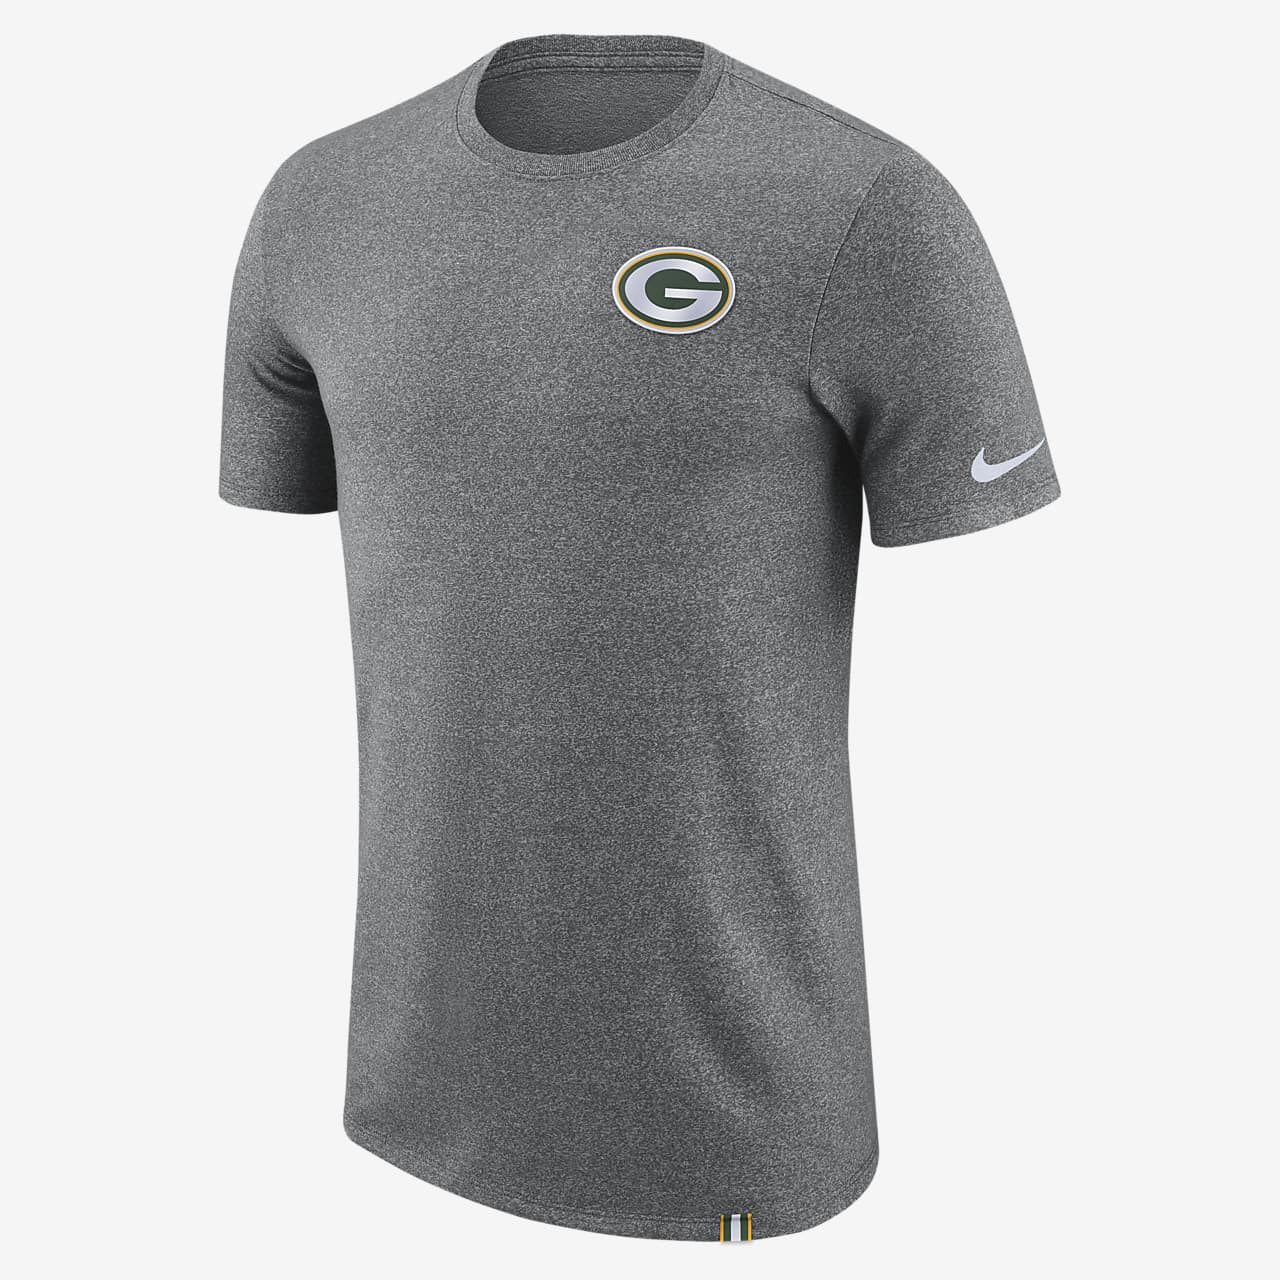 Nike Dry Marled Patch (NFL Packers) Men's T-Shirt. Nike RO